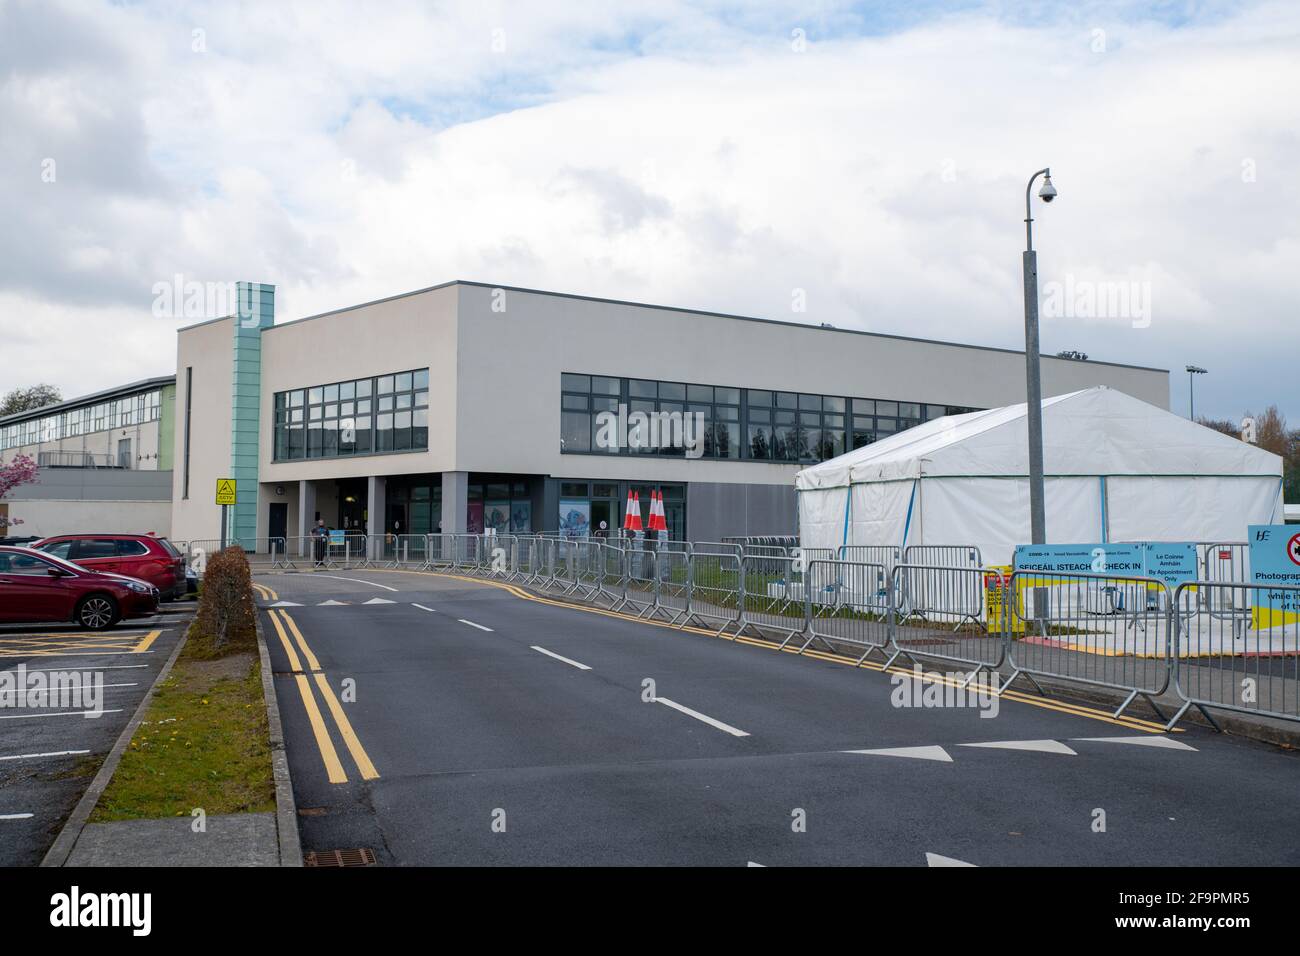 Athlone, Westmeath, Ireland, 20th April 2021. A Covid 19 vaccination centre  opens in the sports hall of AIT (Athlone Institute of Technology) at 9am on  the 21st April 2021. Credit: Eoin Healy/Alamy